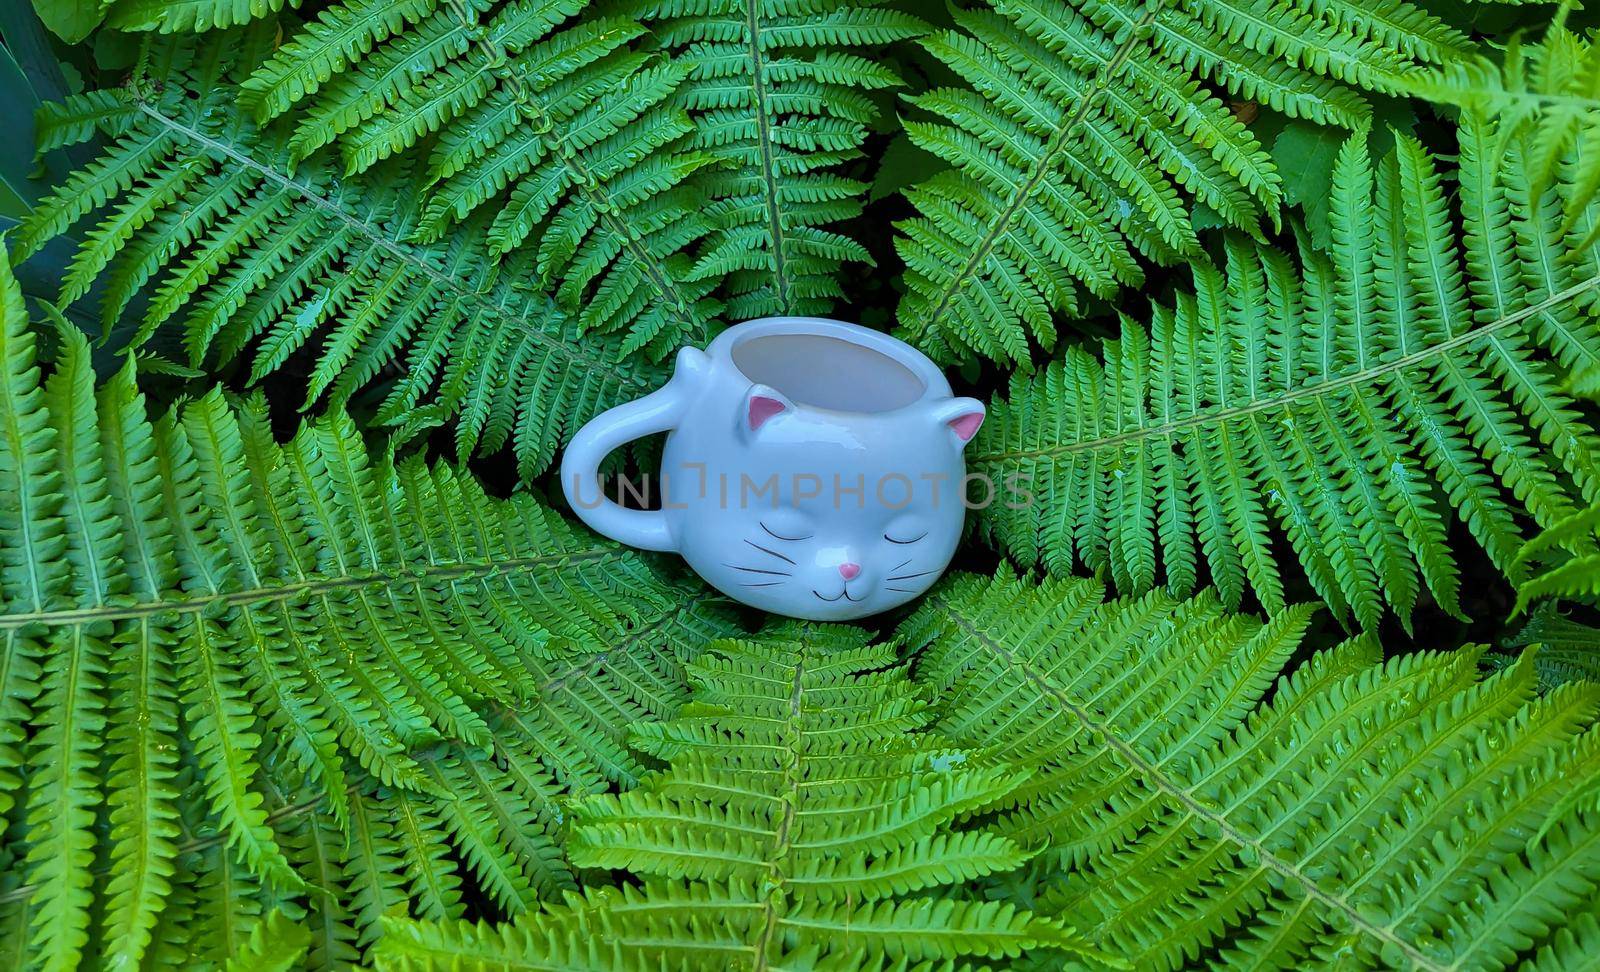 A cup in the shape of a cat's head in the center of a green background of a shuttlecock fern. by lapushka62